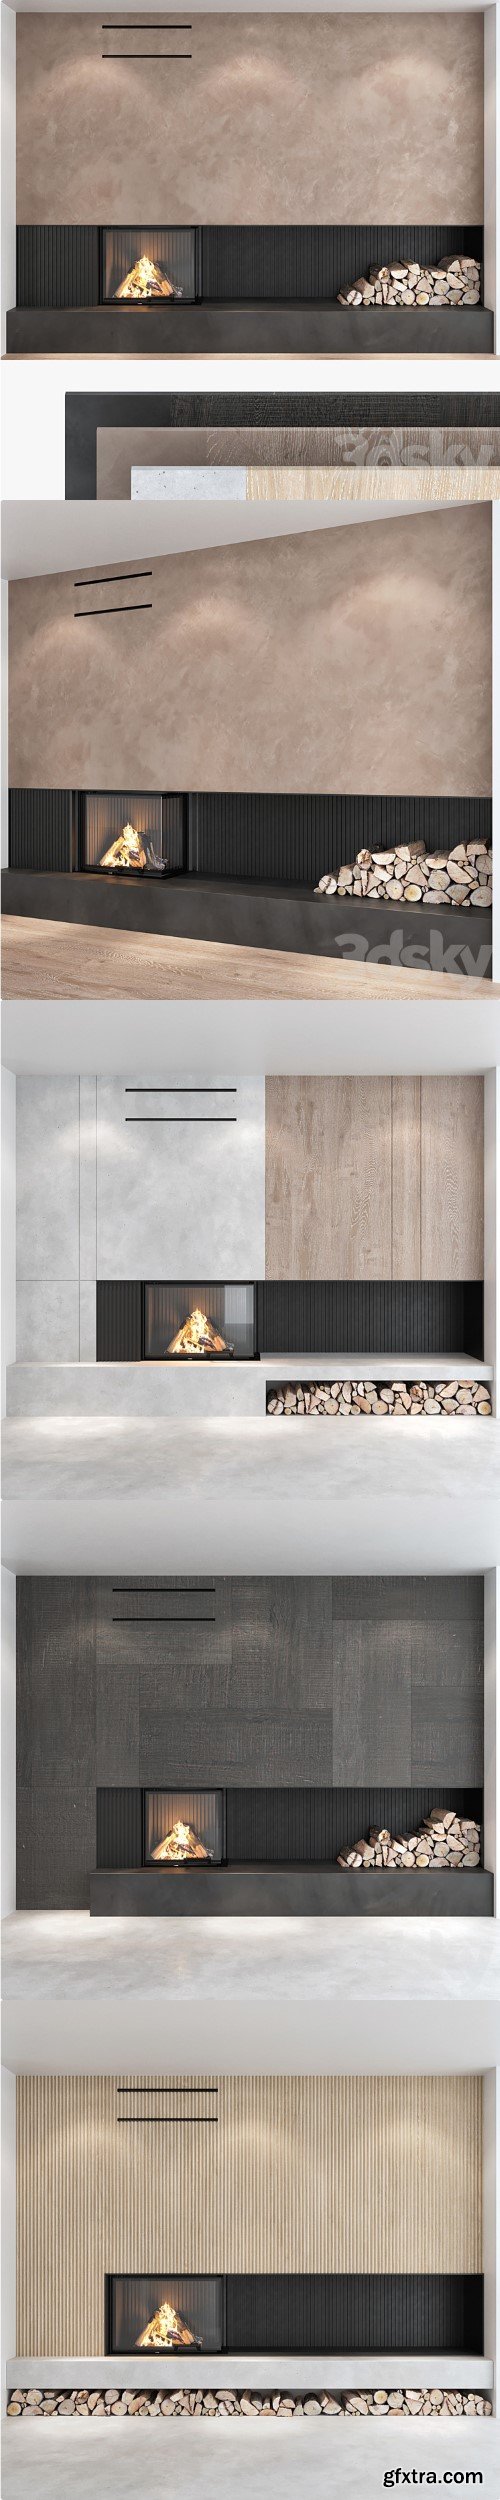 Decorative wall with fireplace set 06